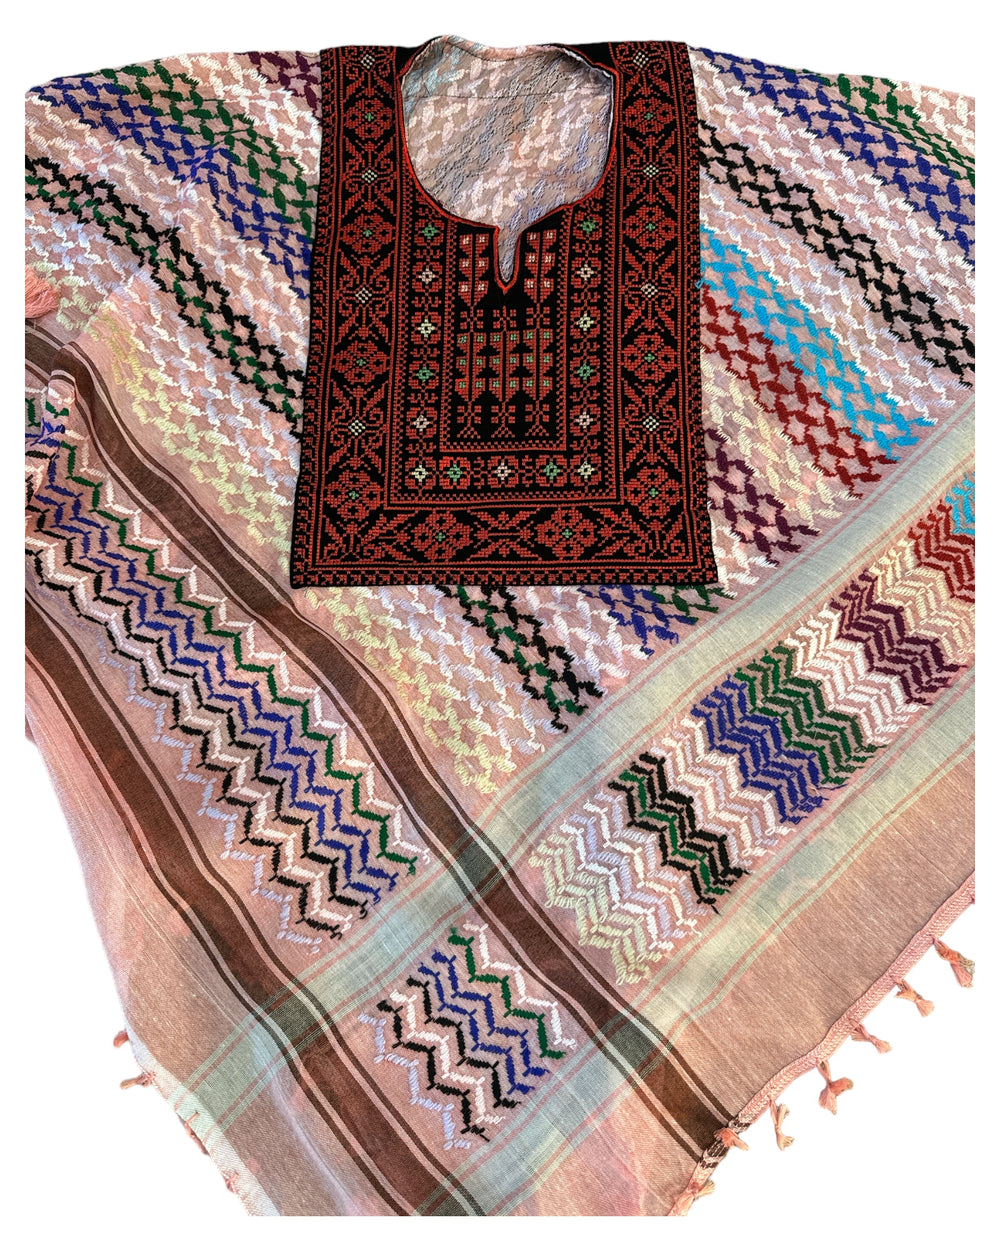 Hand Stitched Pink & Multi-Coloured Poncho with Keffiyeh design and Embroidery